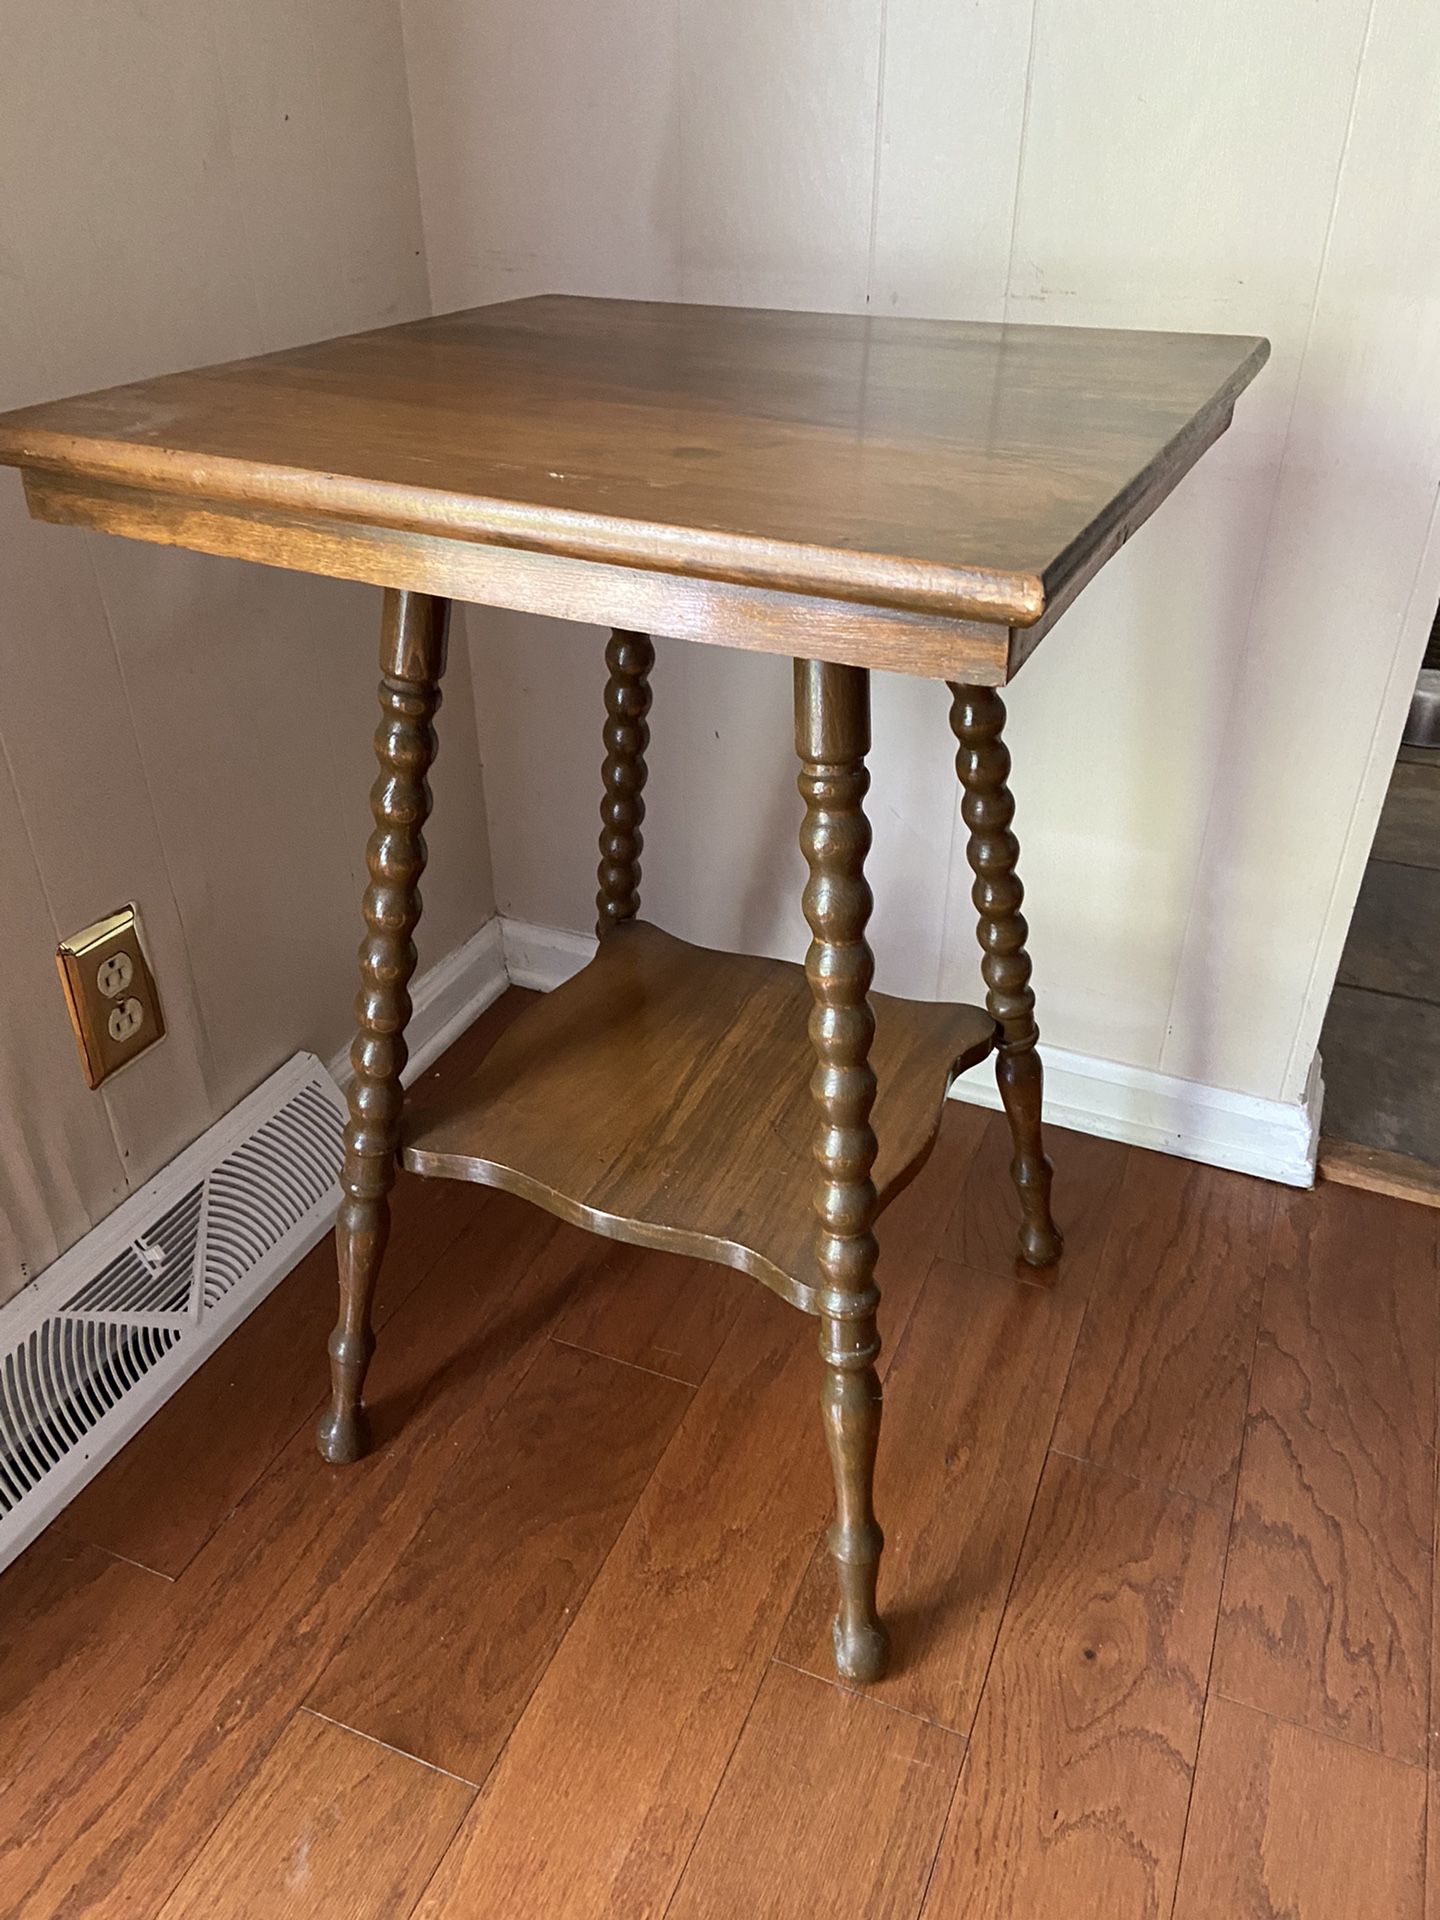 Antique 2 Tier Parlor Table With Turned Legs Side Table